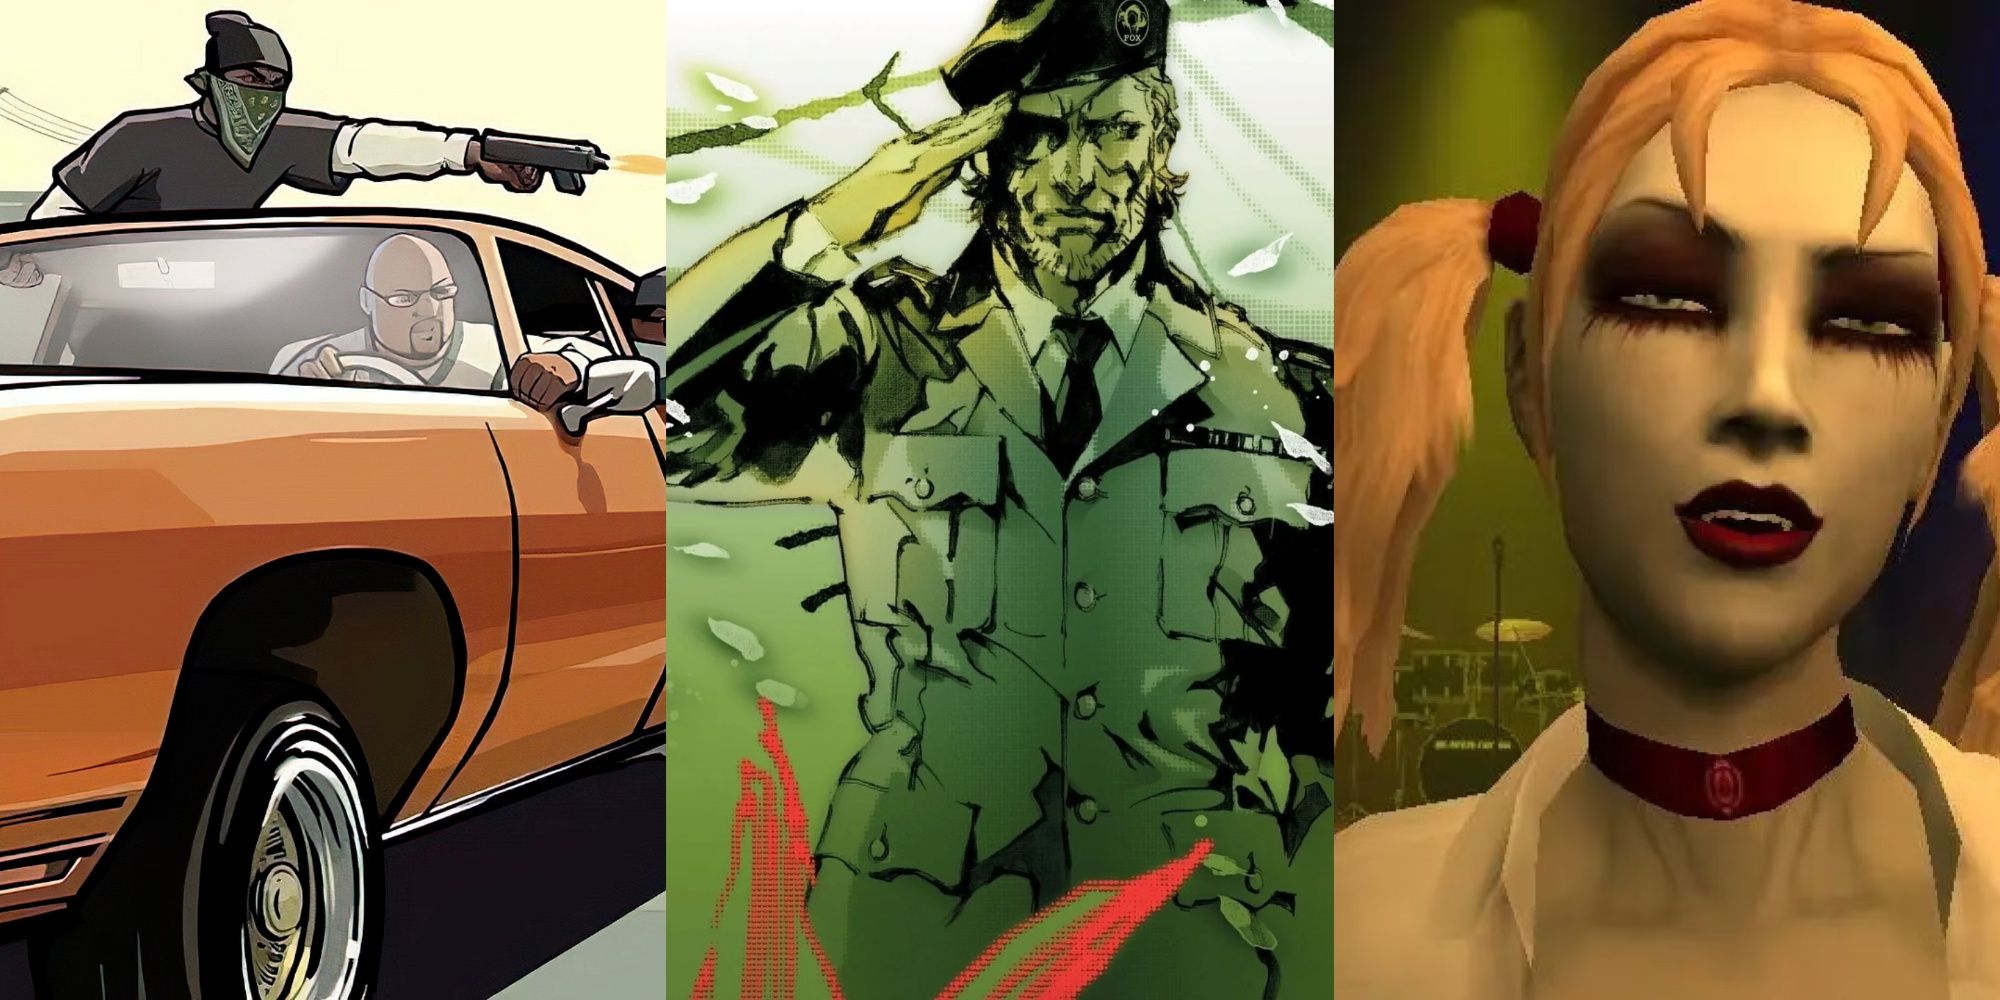 Official art for GTA San Andreas and Metal Gear Solid 3, and a screenshot of Jeanette from Vampire The Masquerade Bloodlines